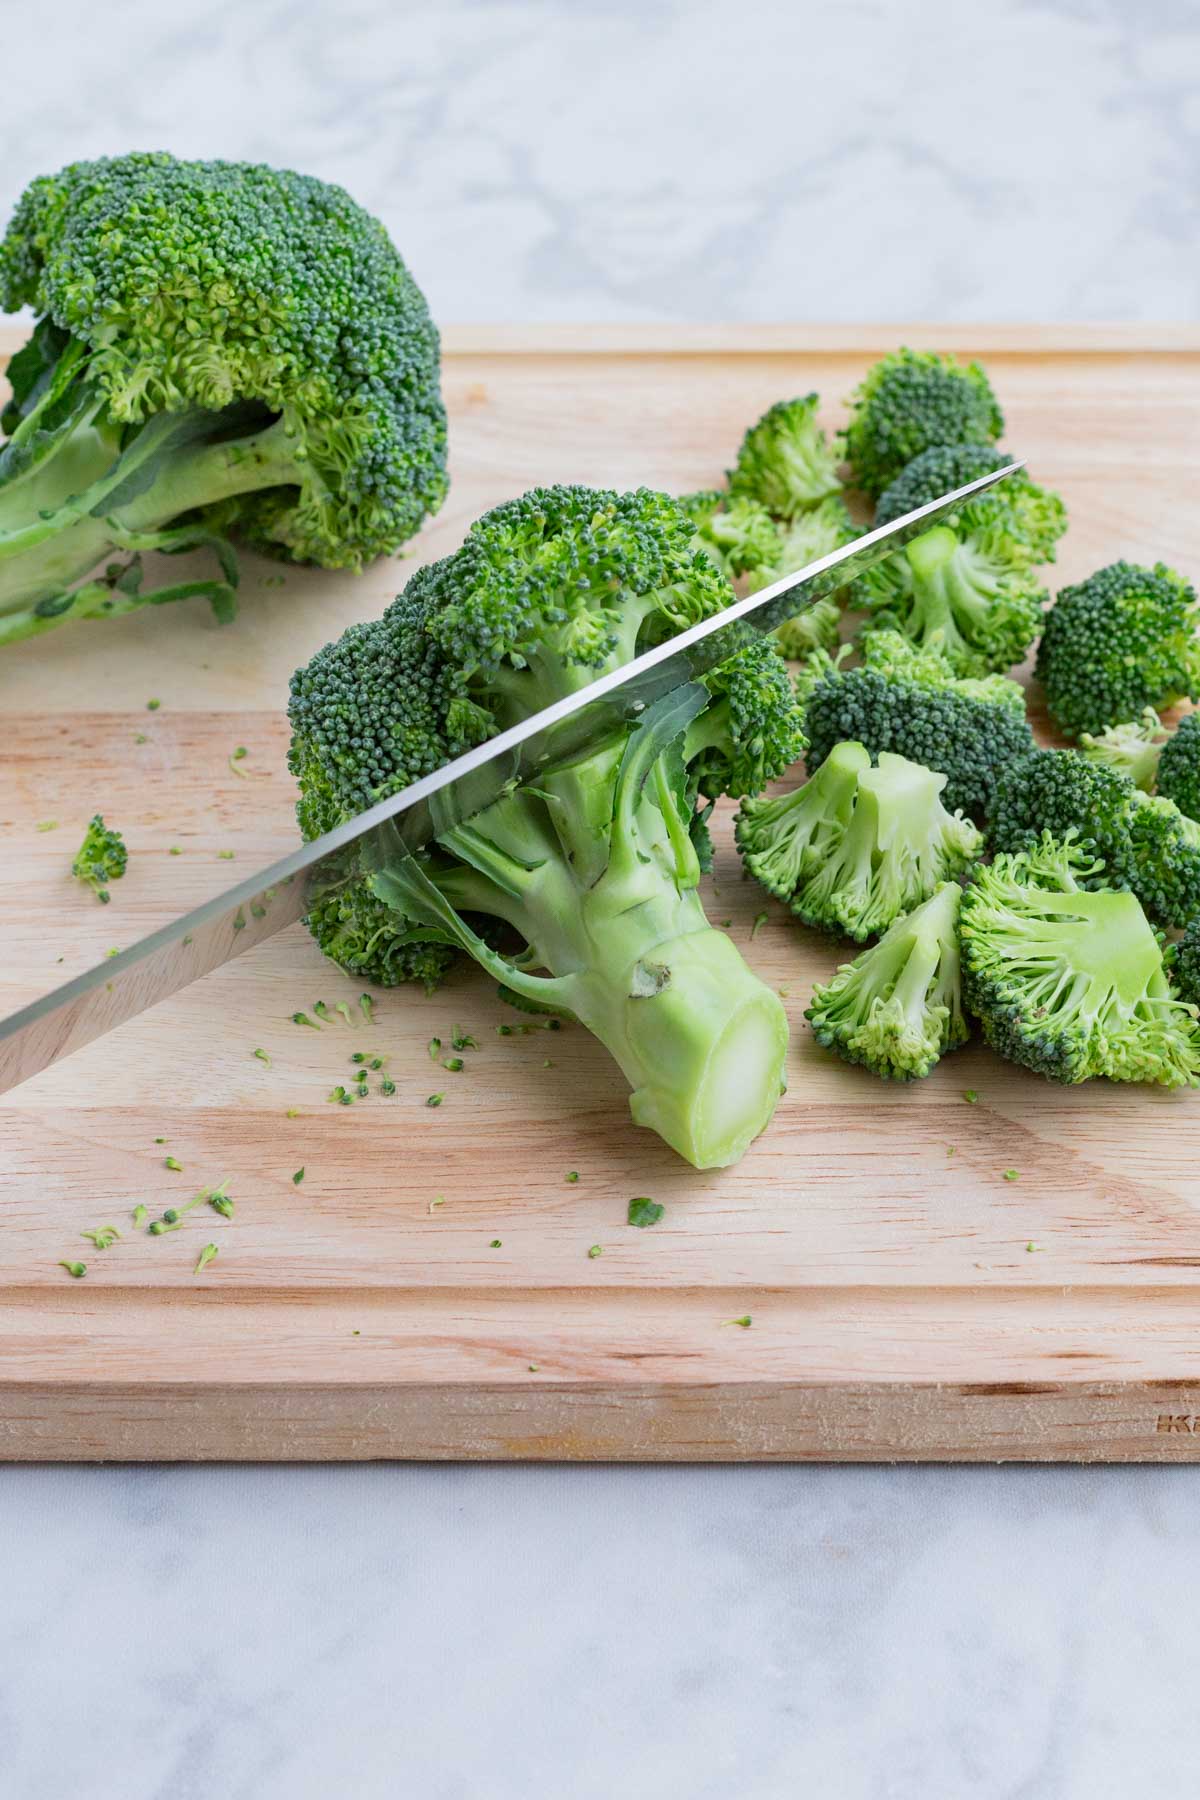 Broccoli is chopped into small pieces on a cutting board.